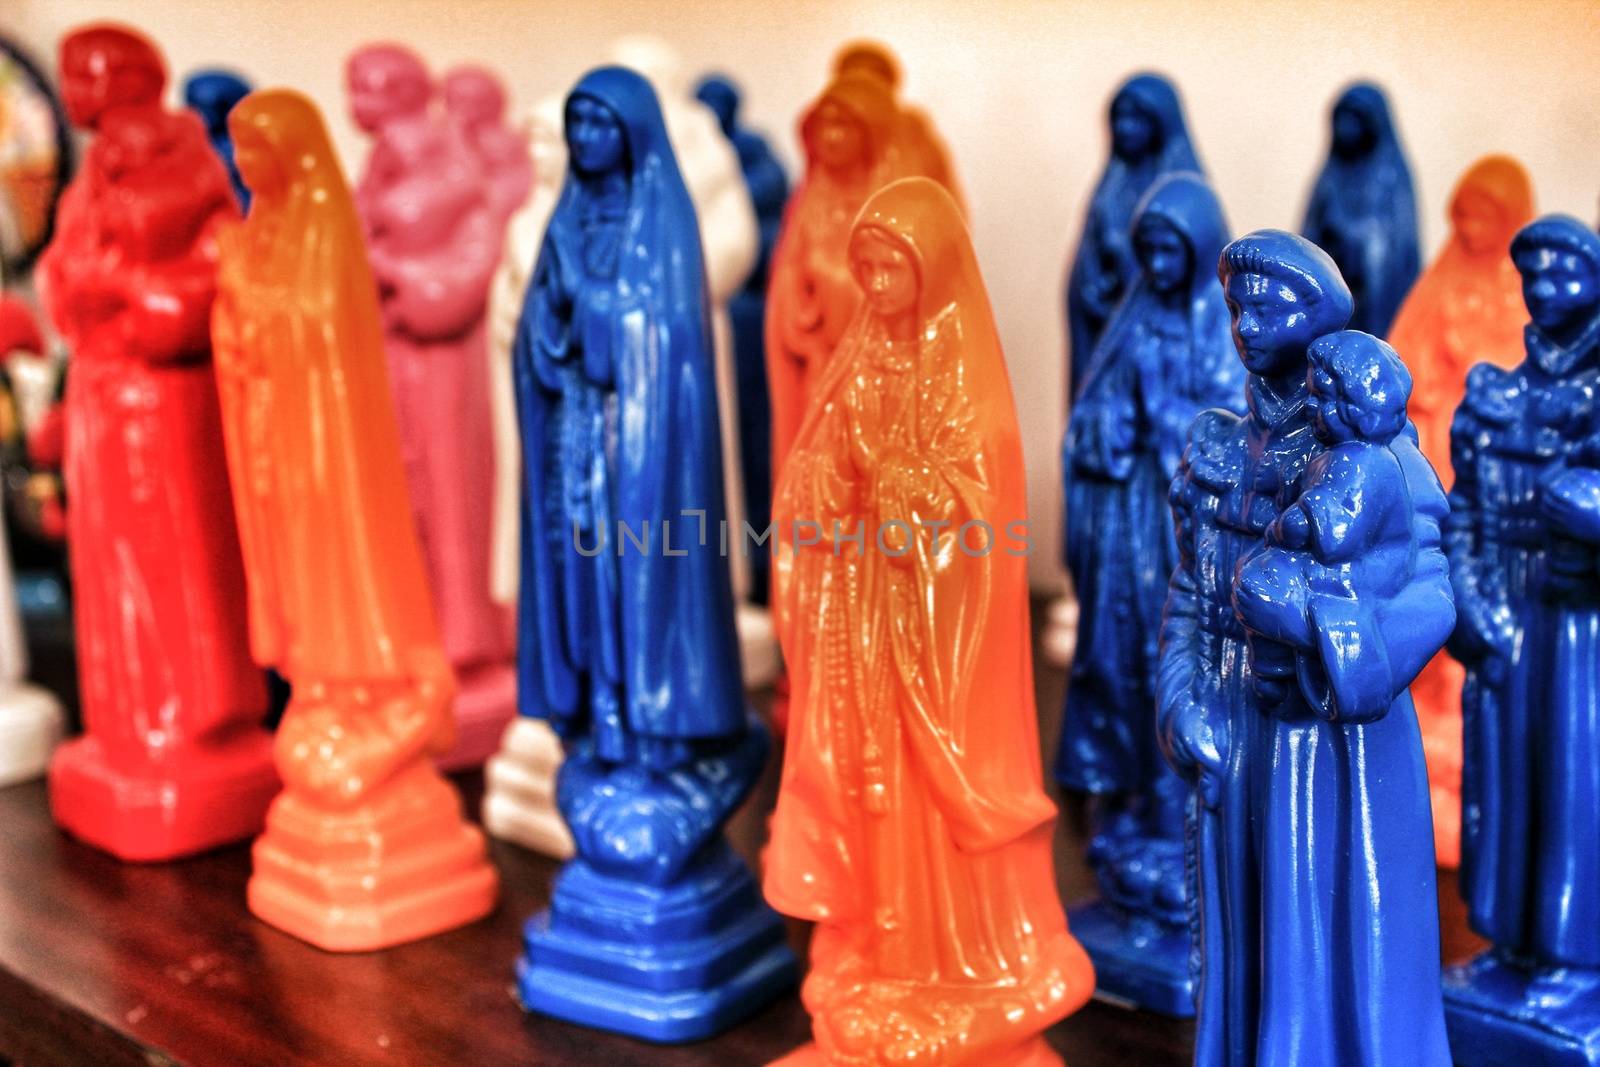 Colorful and typical souvenirs of Saint Anthony figurines and Fatima virgin in a showcase in Lisbon, Portugal